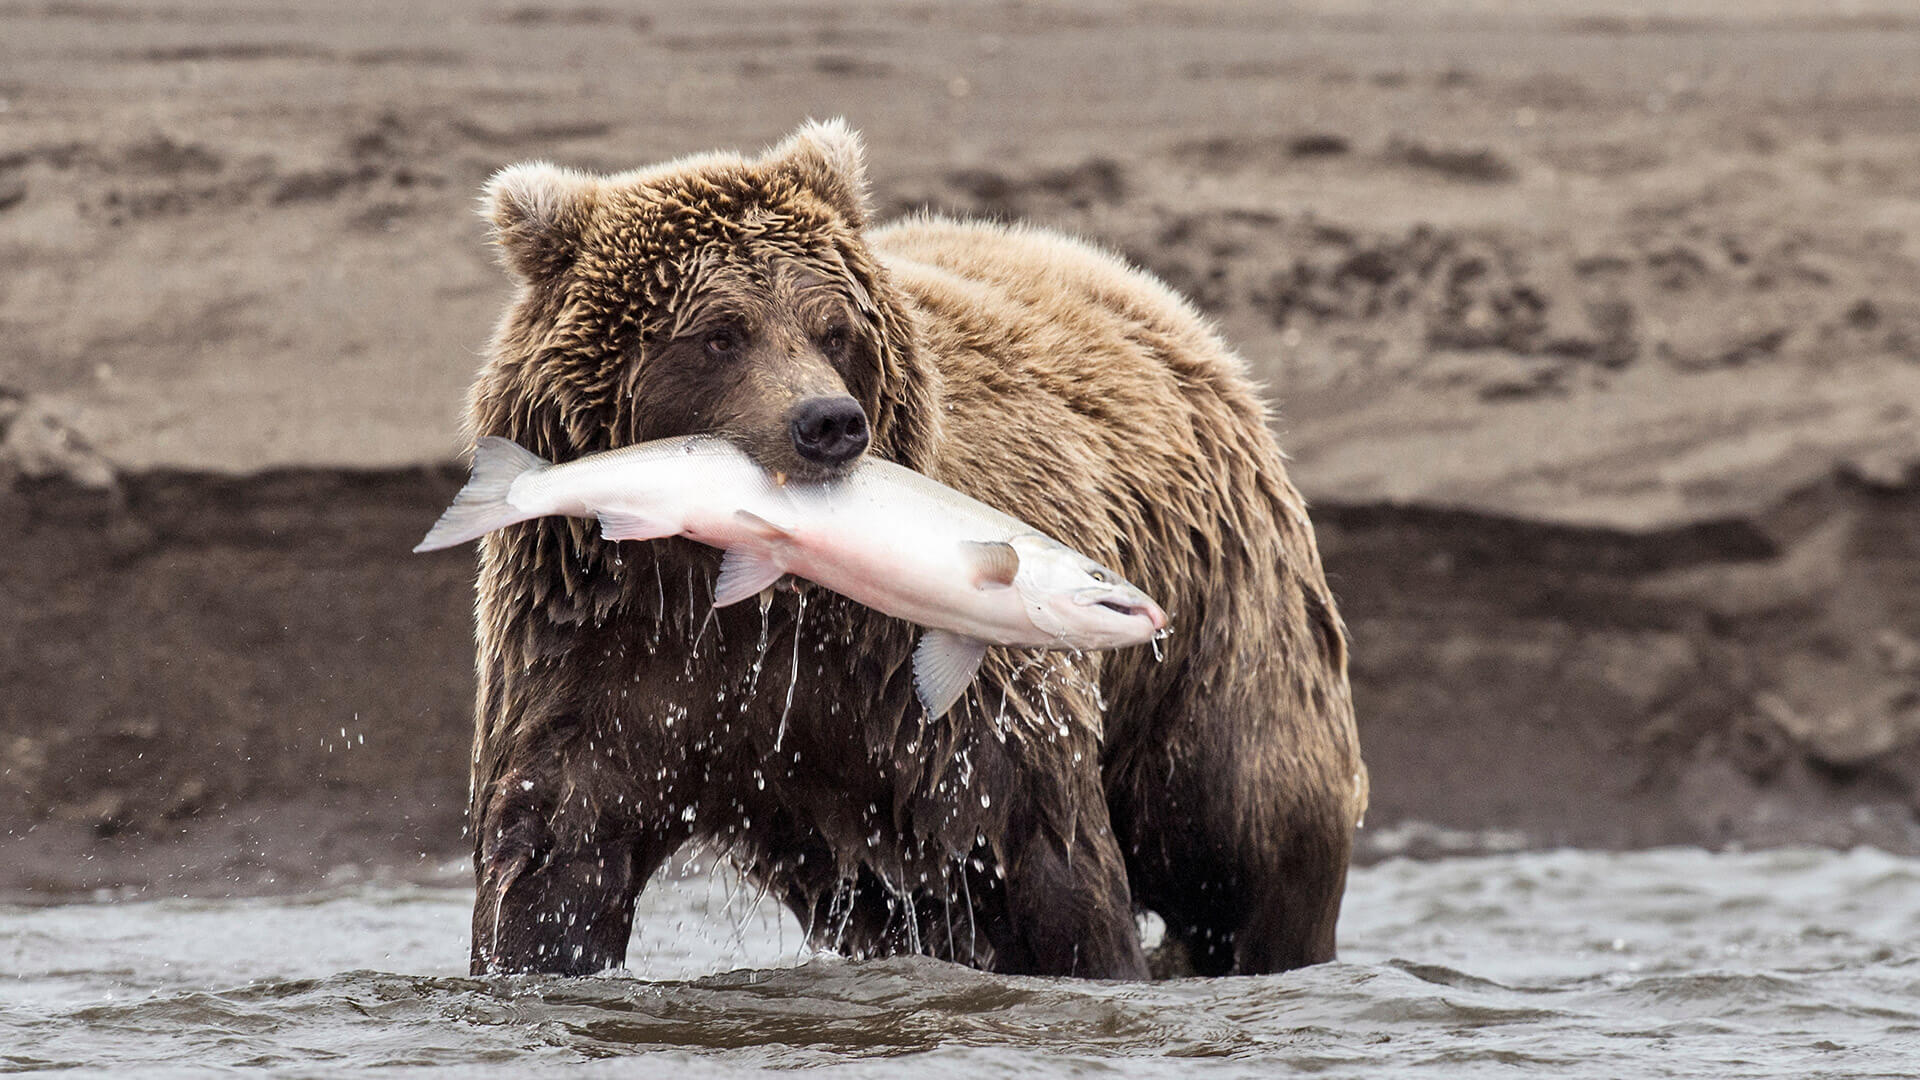 Bear with captured fish in mouth in waterway